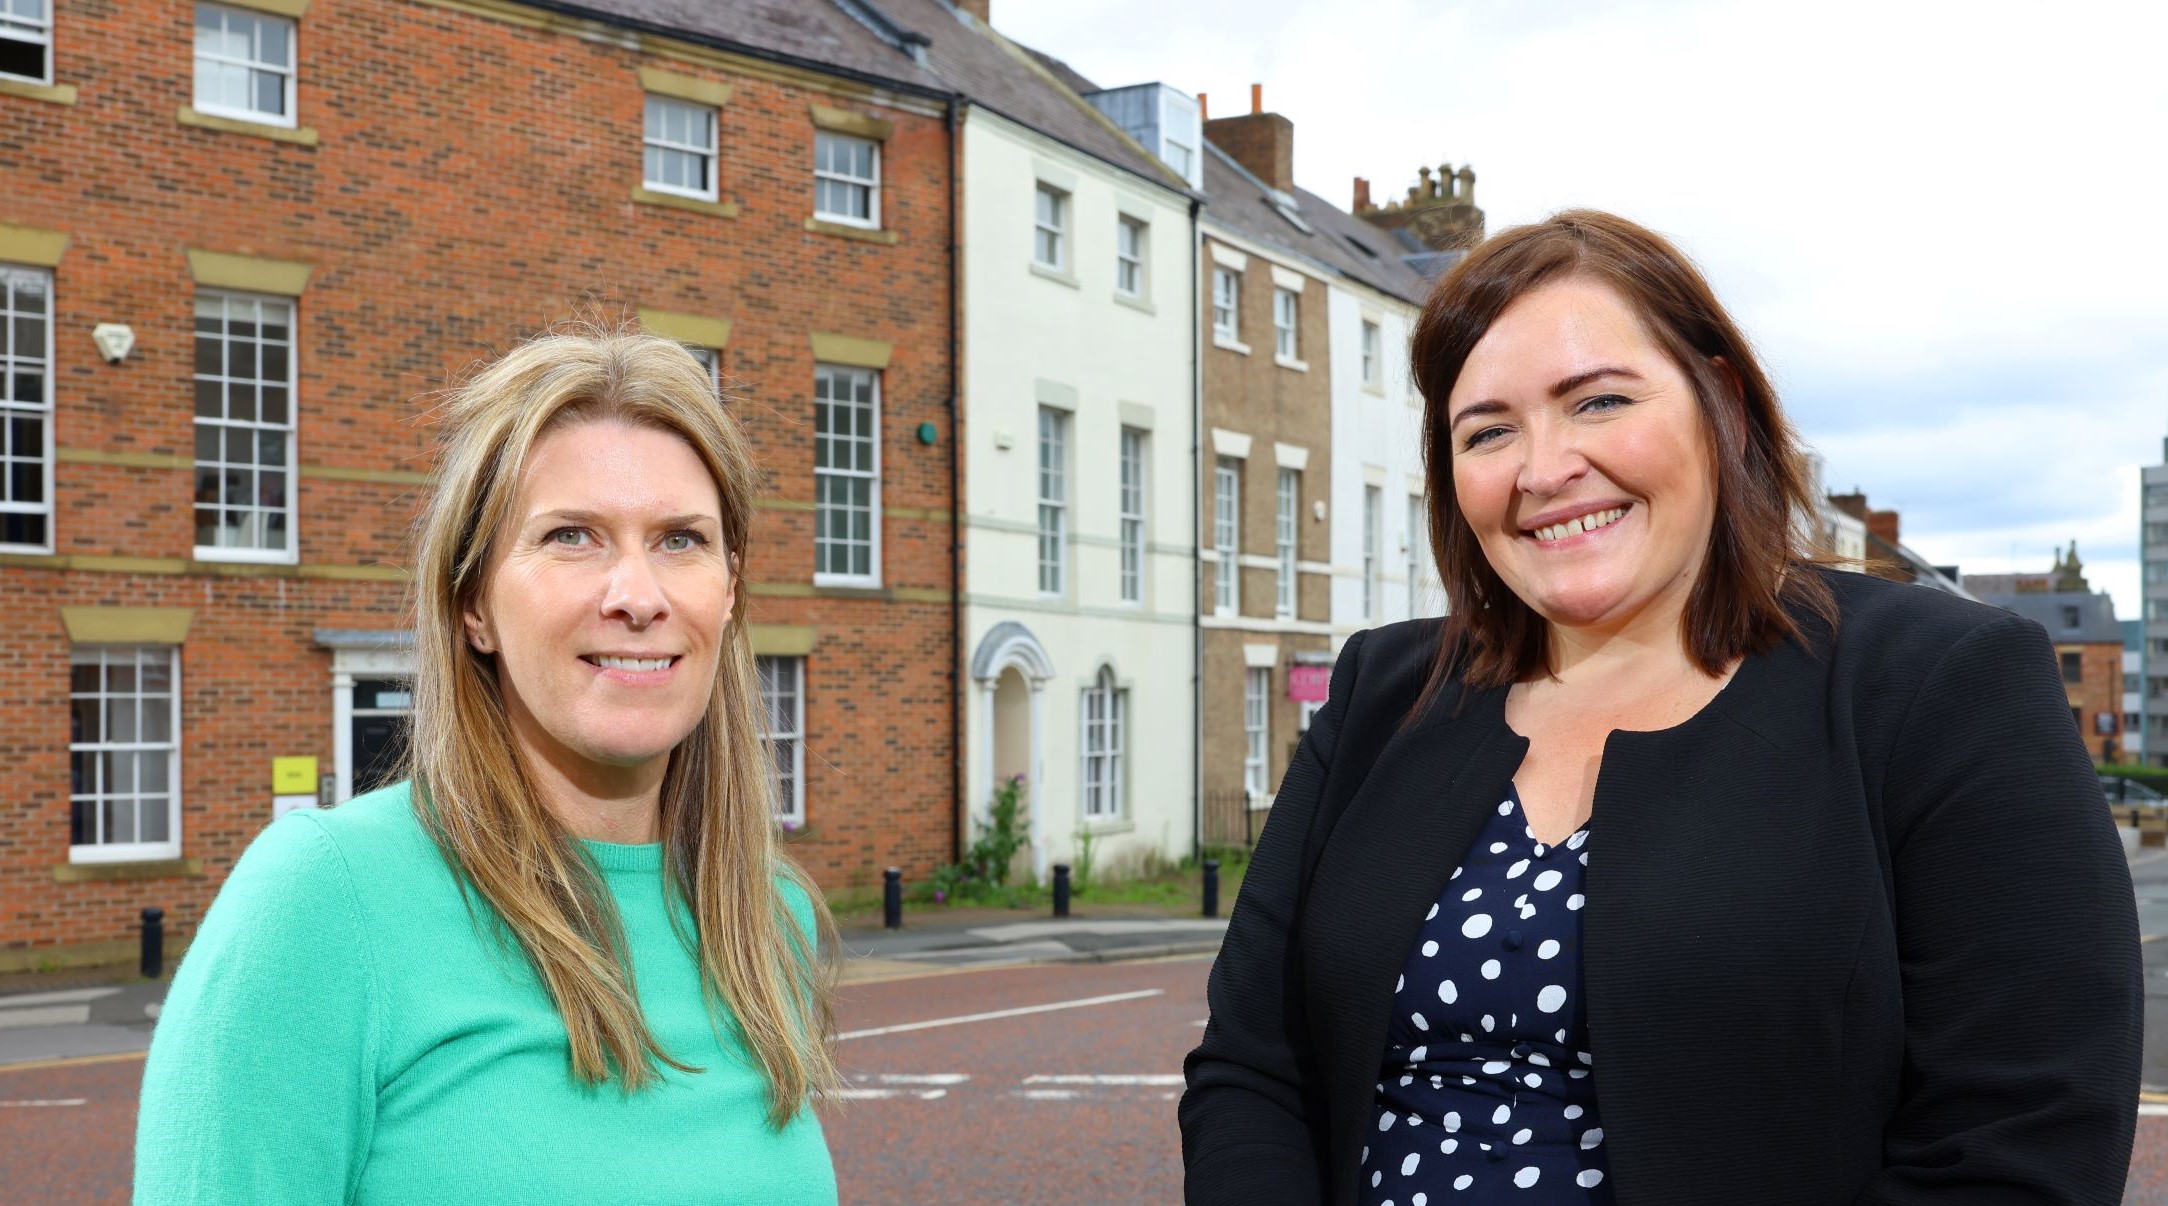 Joanna Feeley, founder and CEO of TrendBible, with Julie Cuthbertson, corporate finance manager at RMT Accountants and Business Advisors